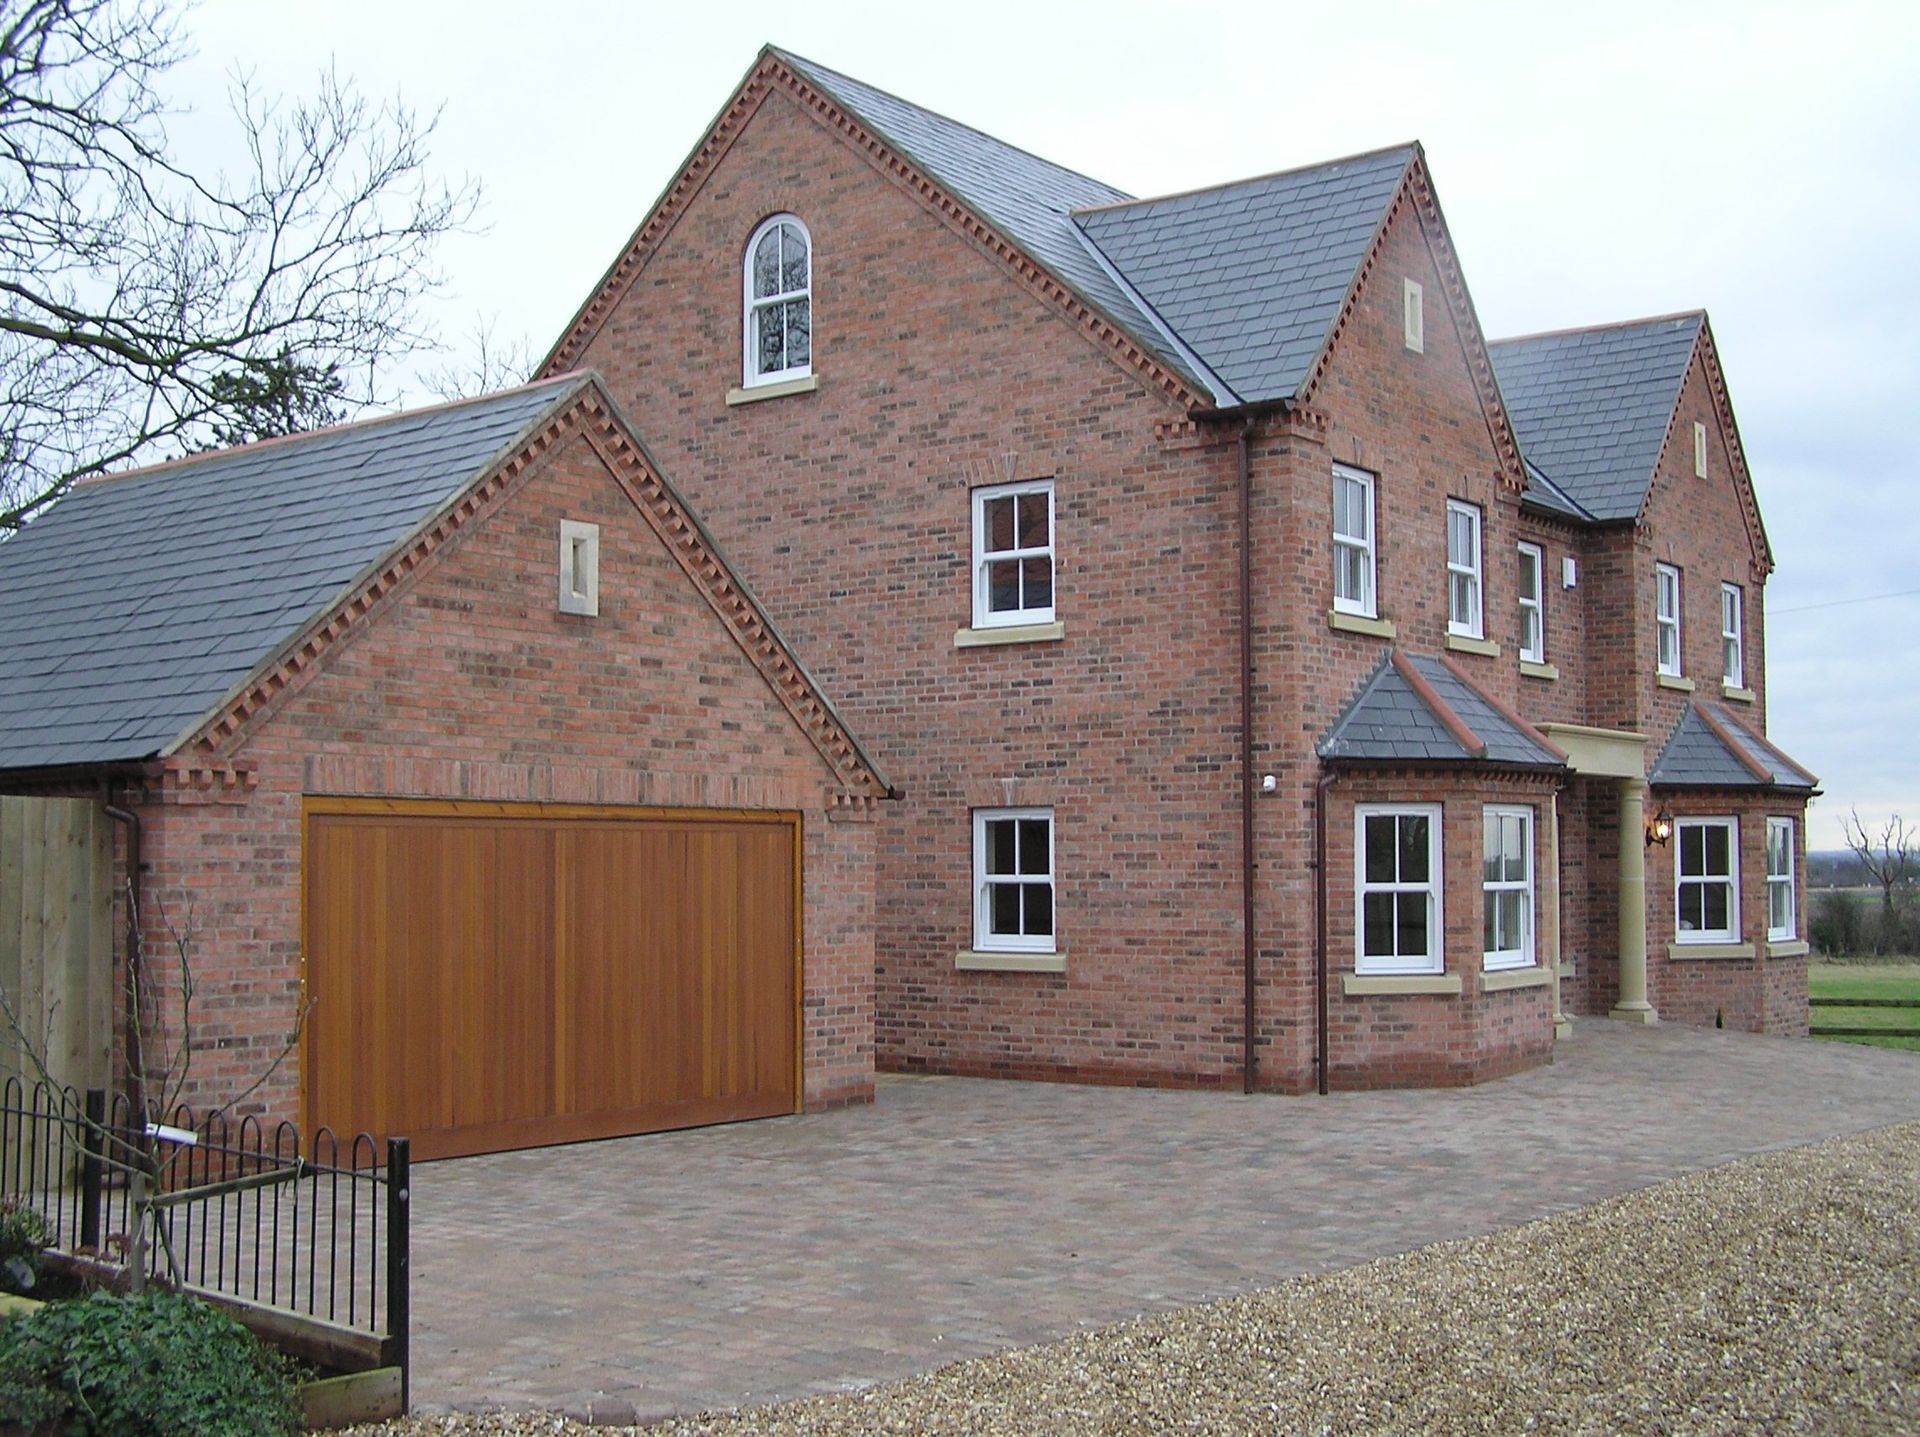 New House by Woodlands Homes near Lincoln, Lincolnshire.